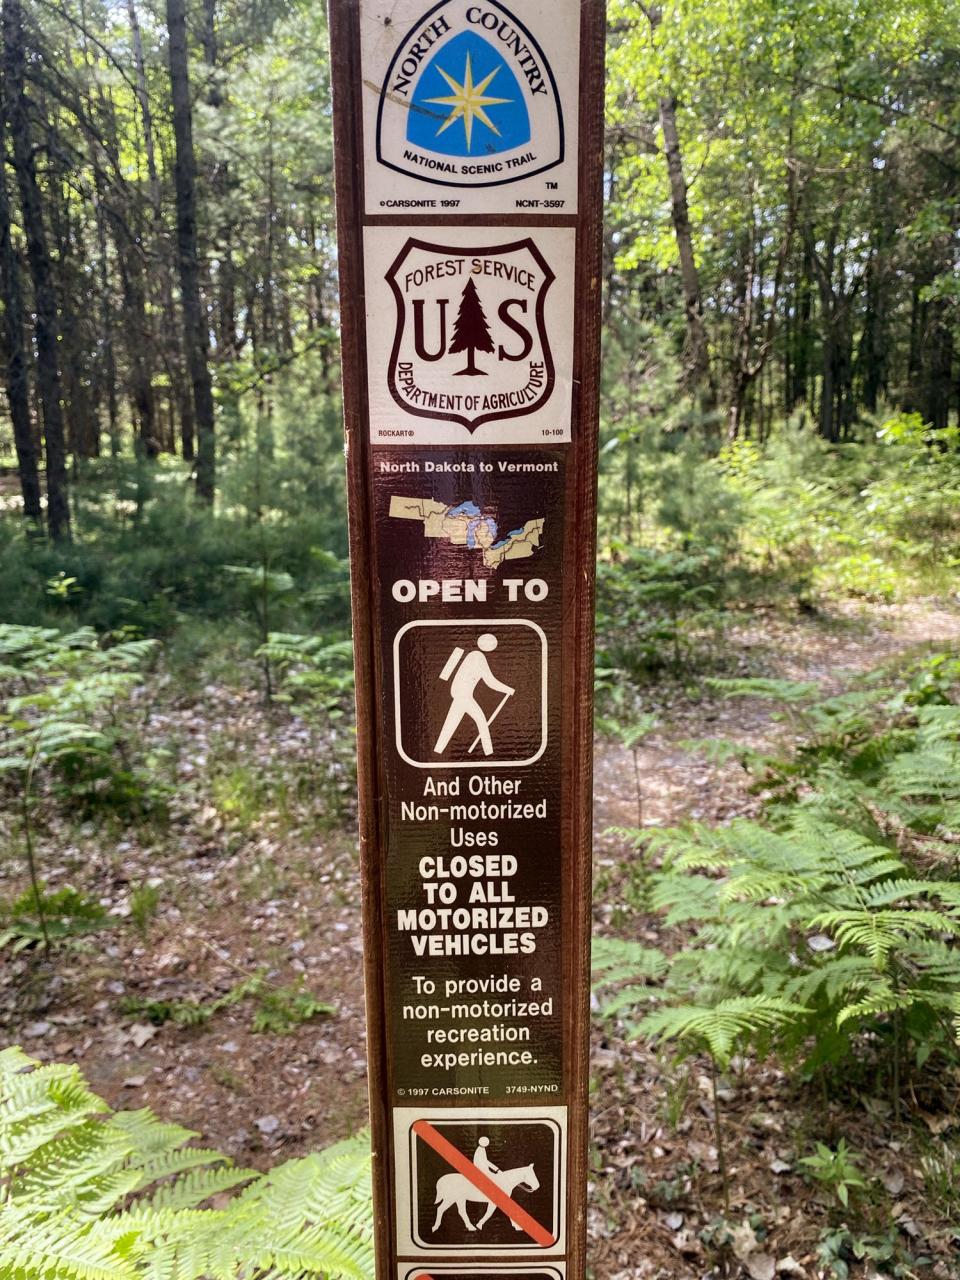 A North Country Trail sign captured by Jim and Elijah Pool during their 52-mile hike in the Manistee National Forest in the northern part of the Lower Peninsula.